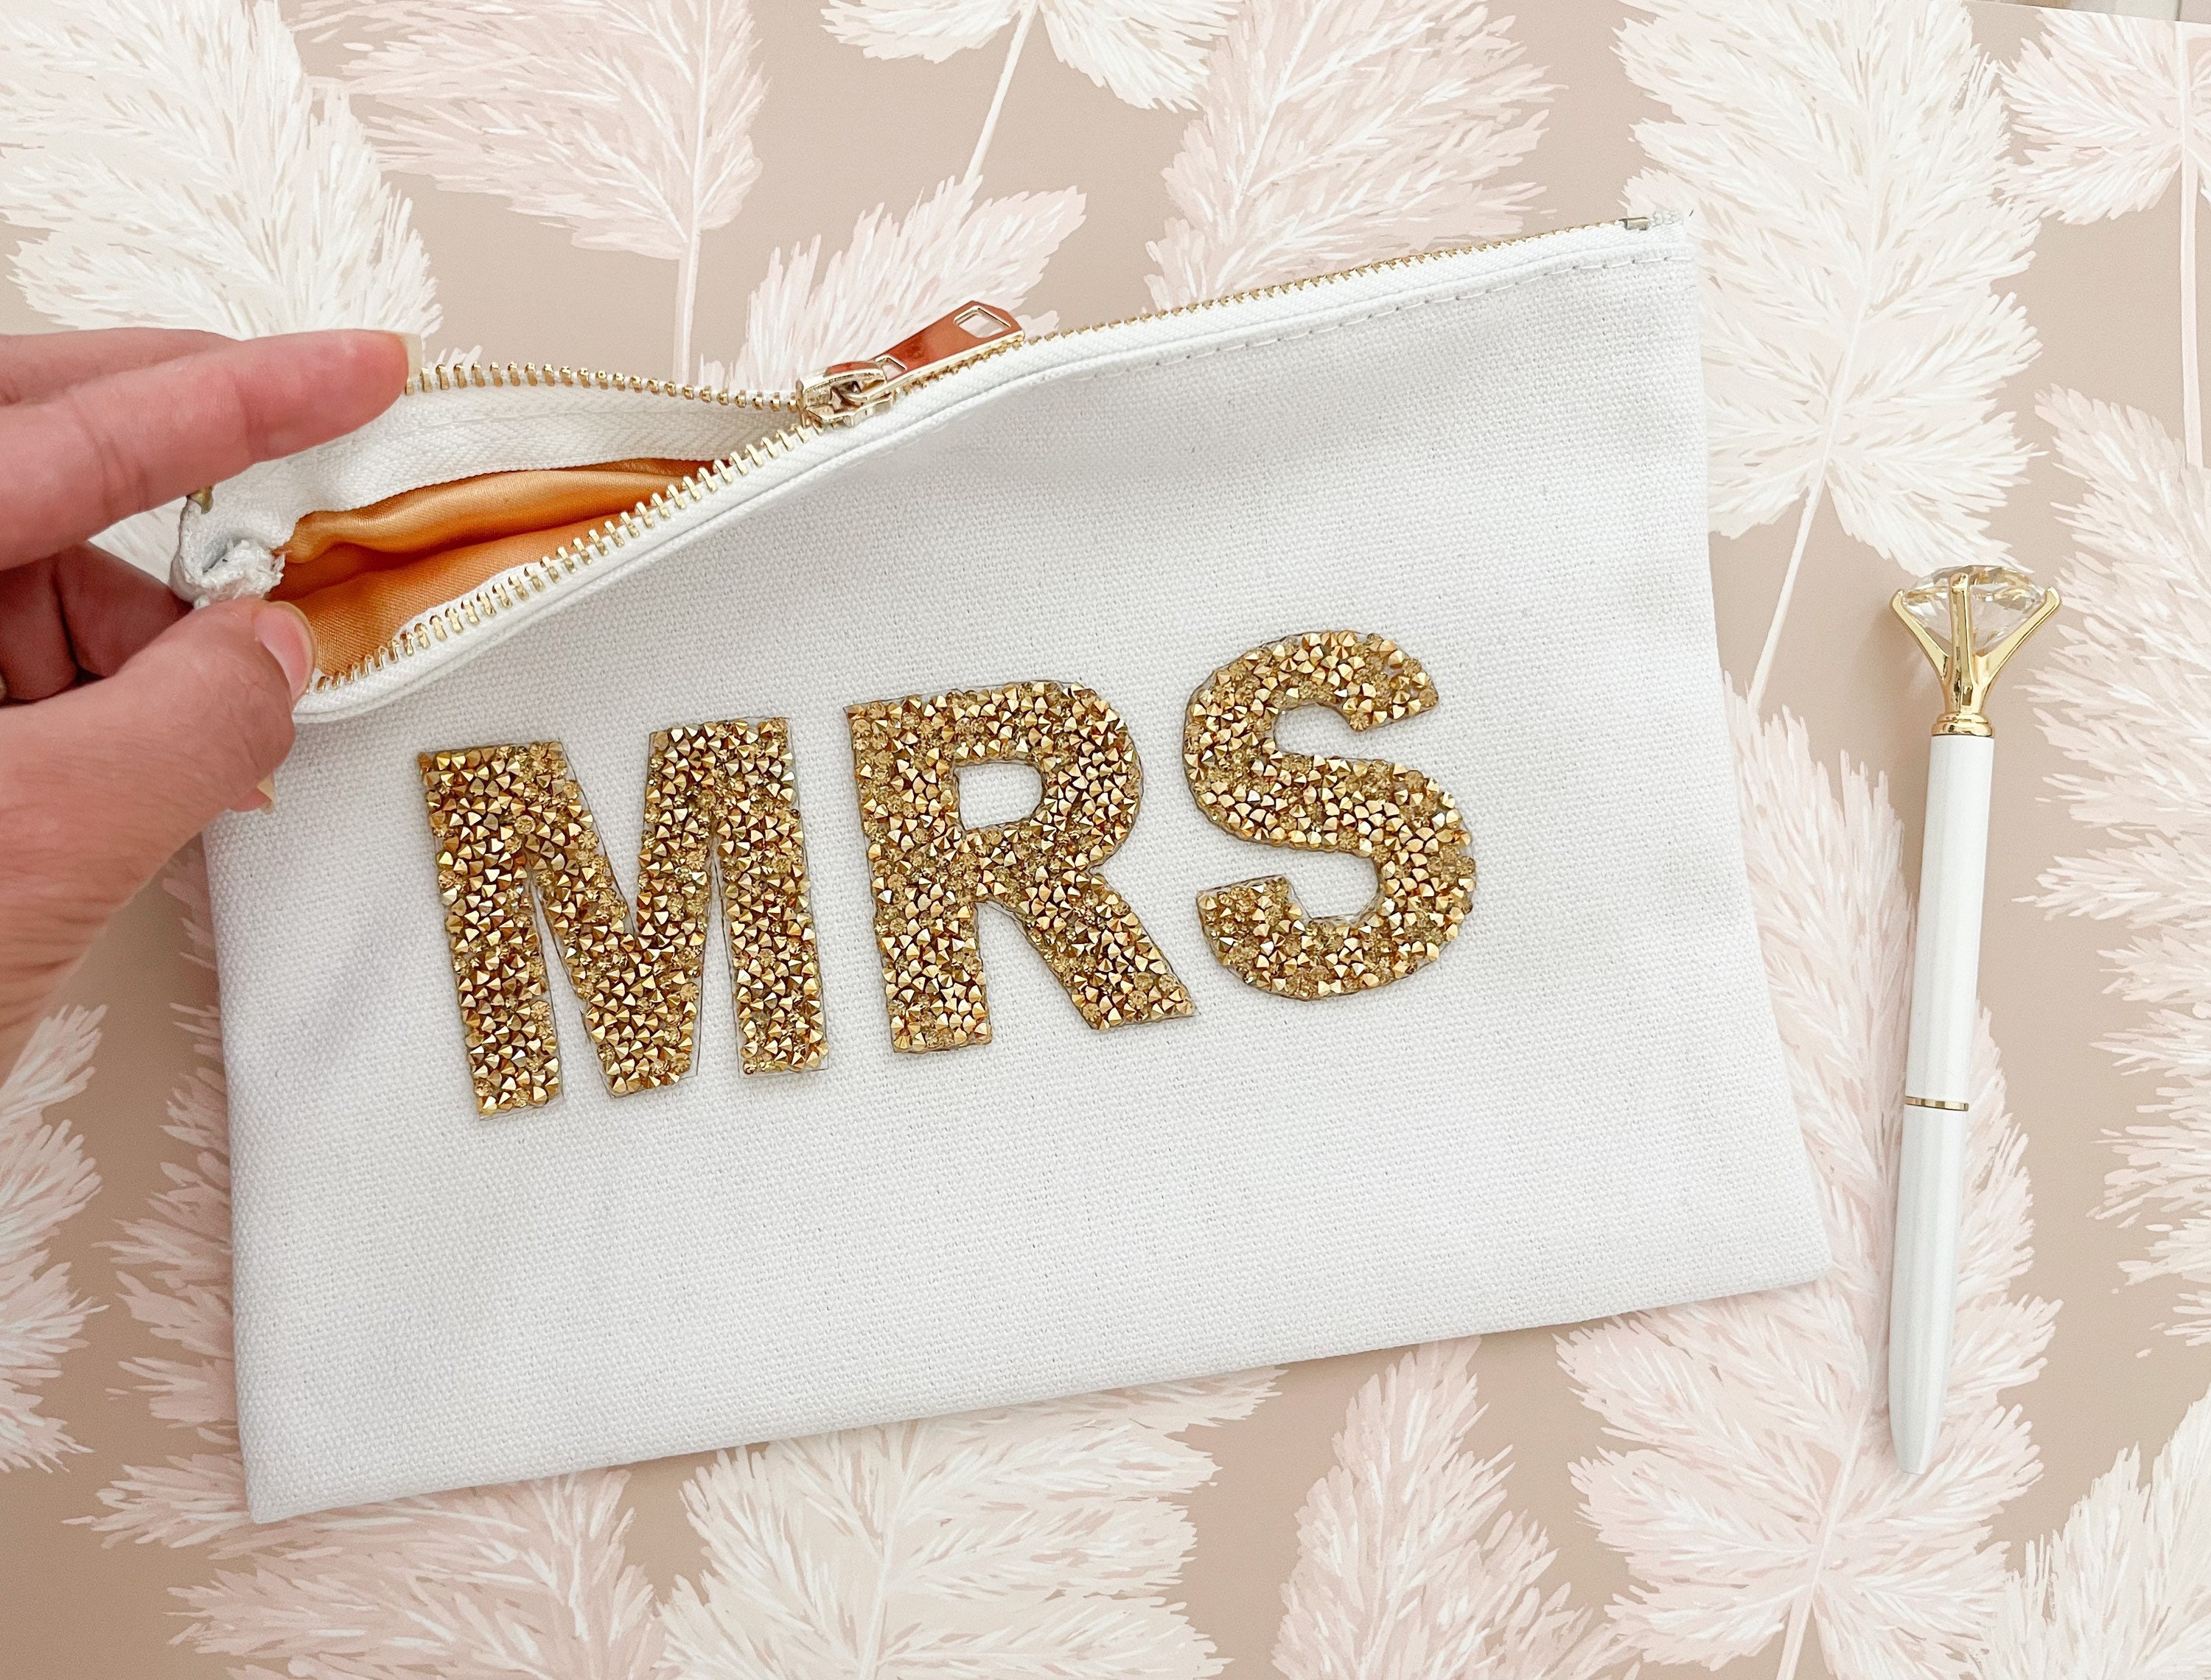 MakeUp Bag Make Up Bag Bridesmaid Make Up Bag with Name Birthday Gift Ideas  for Her Personalized - BRGMUB001